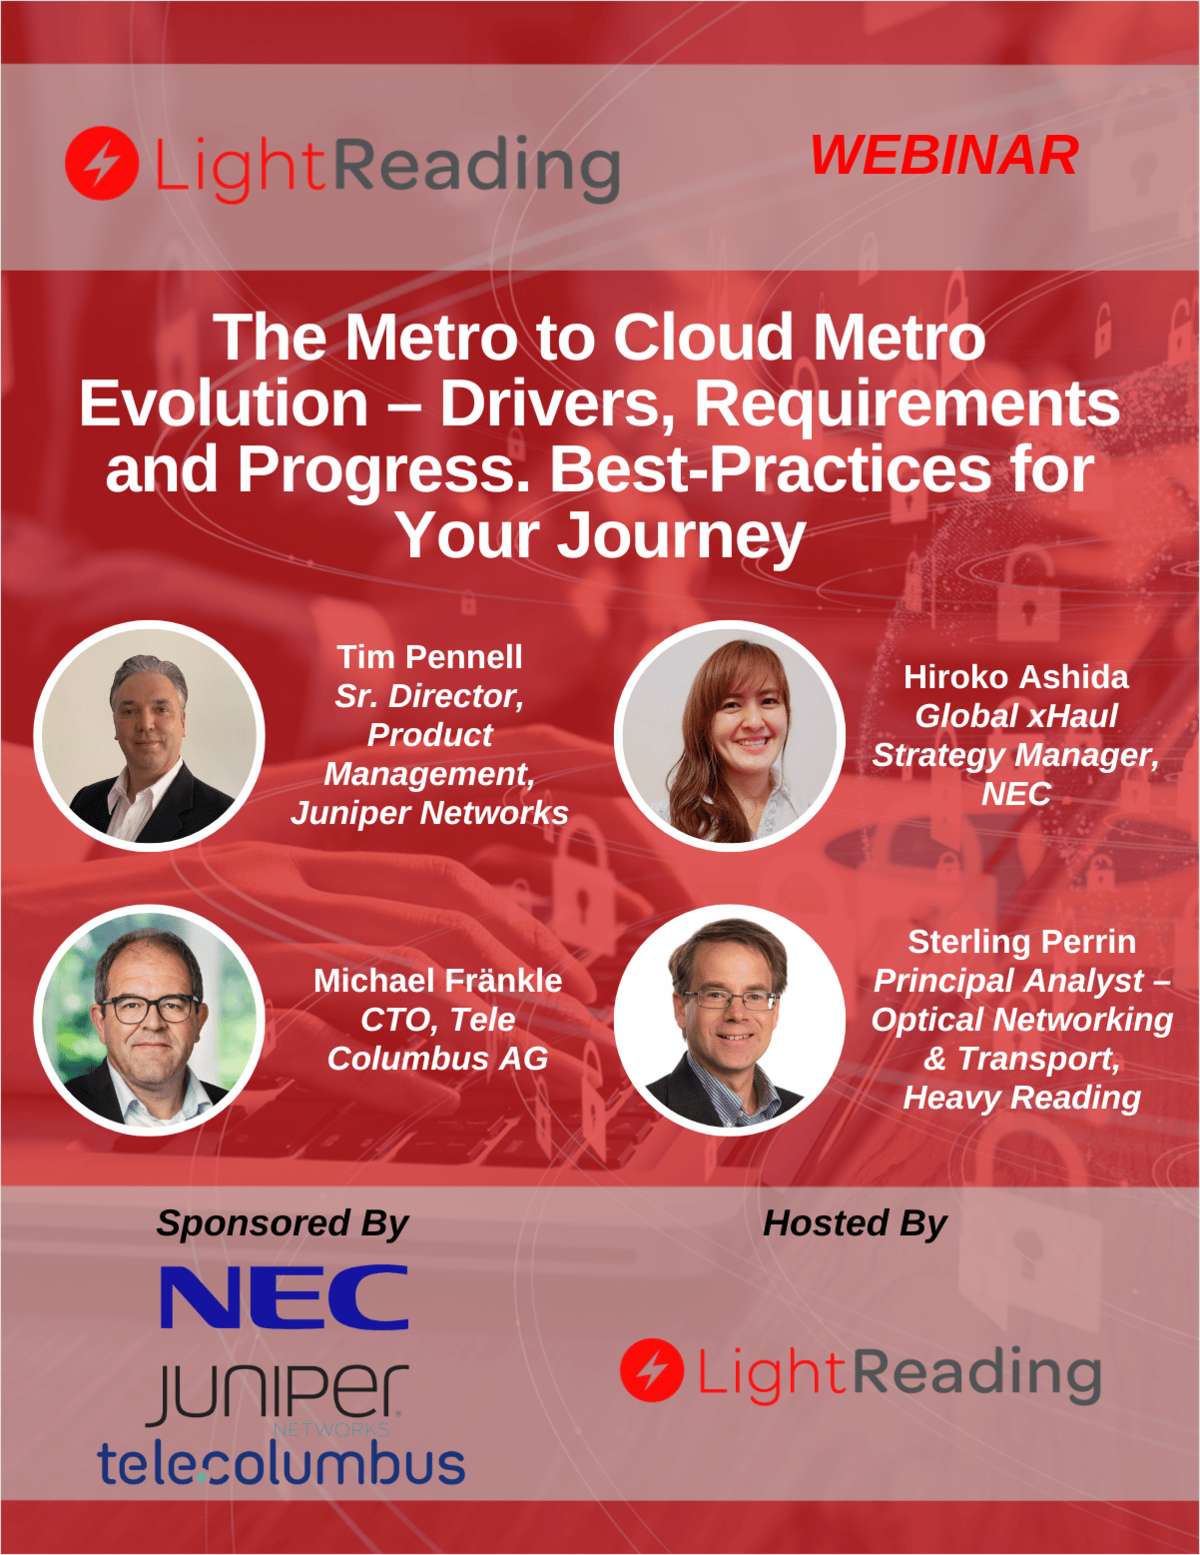 The Metro to Cloud Metro Evolution -- Drivers, Requirements and Progress. Best-Practices for Your Journey